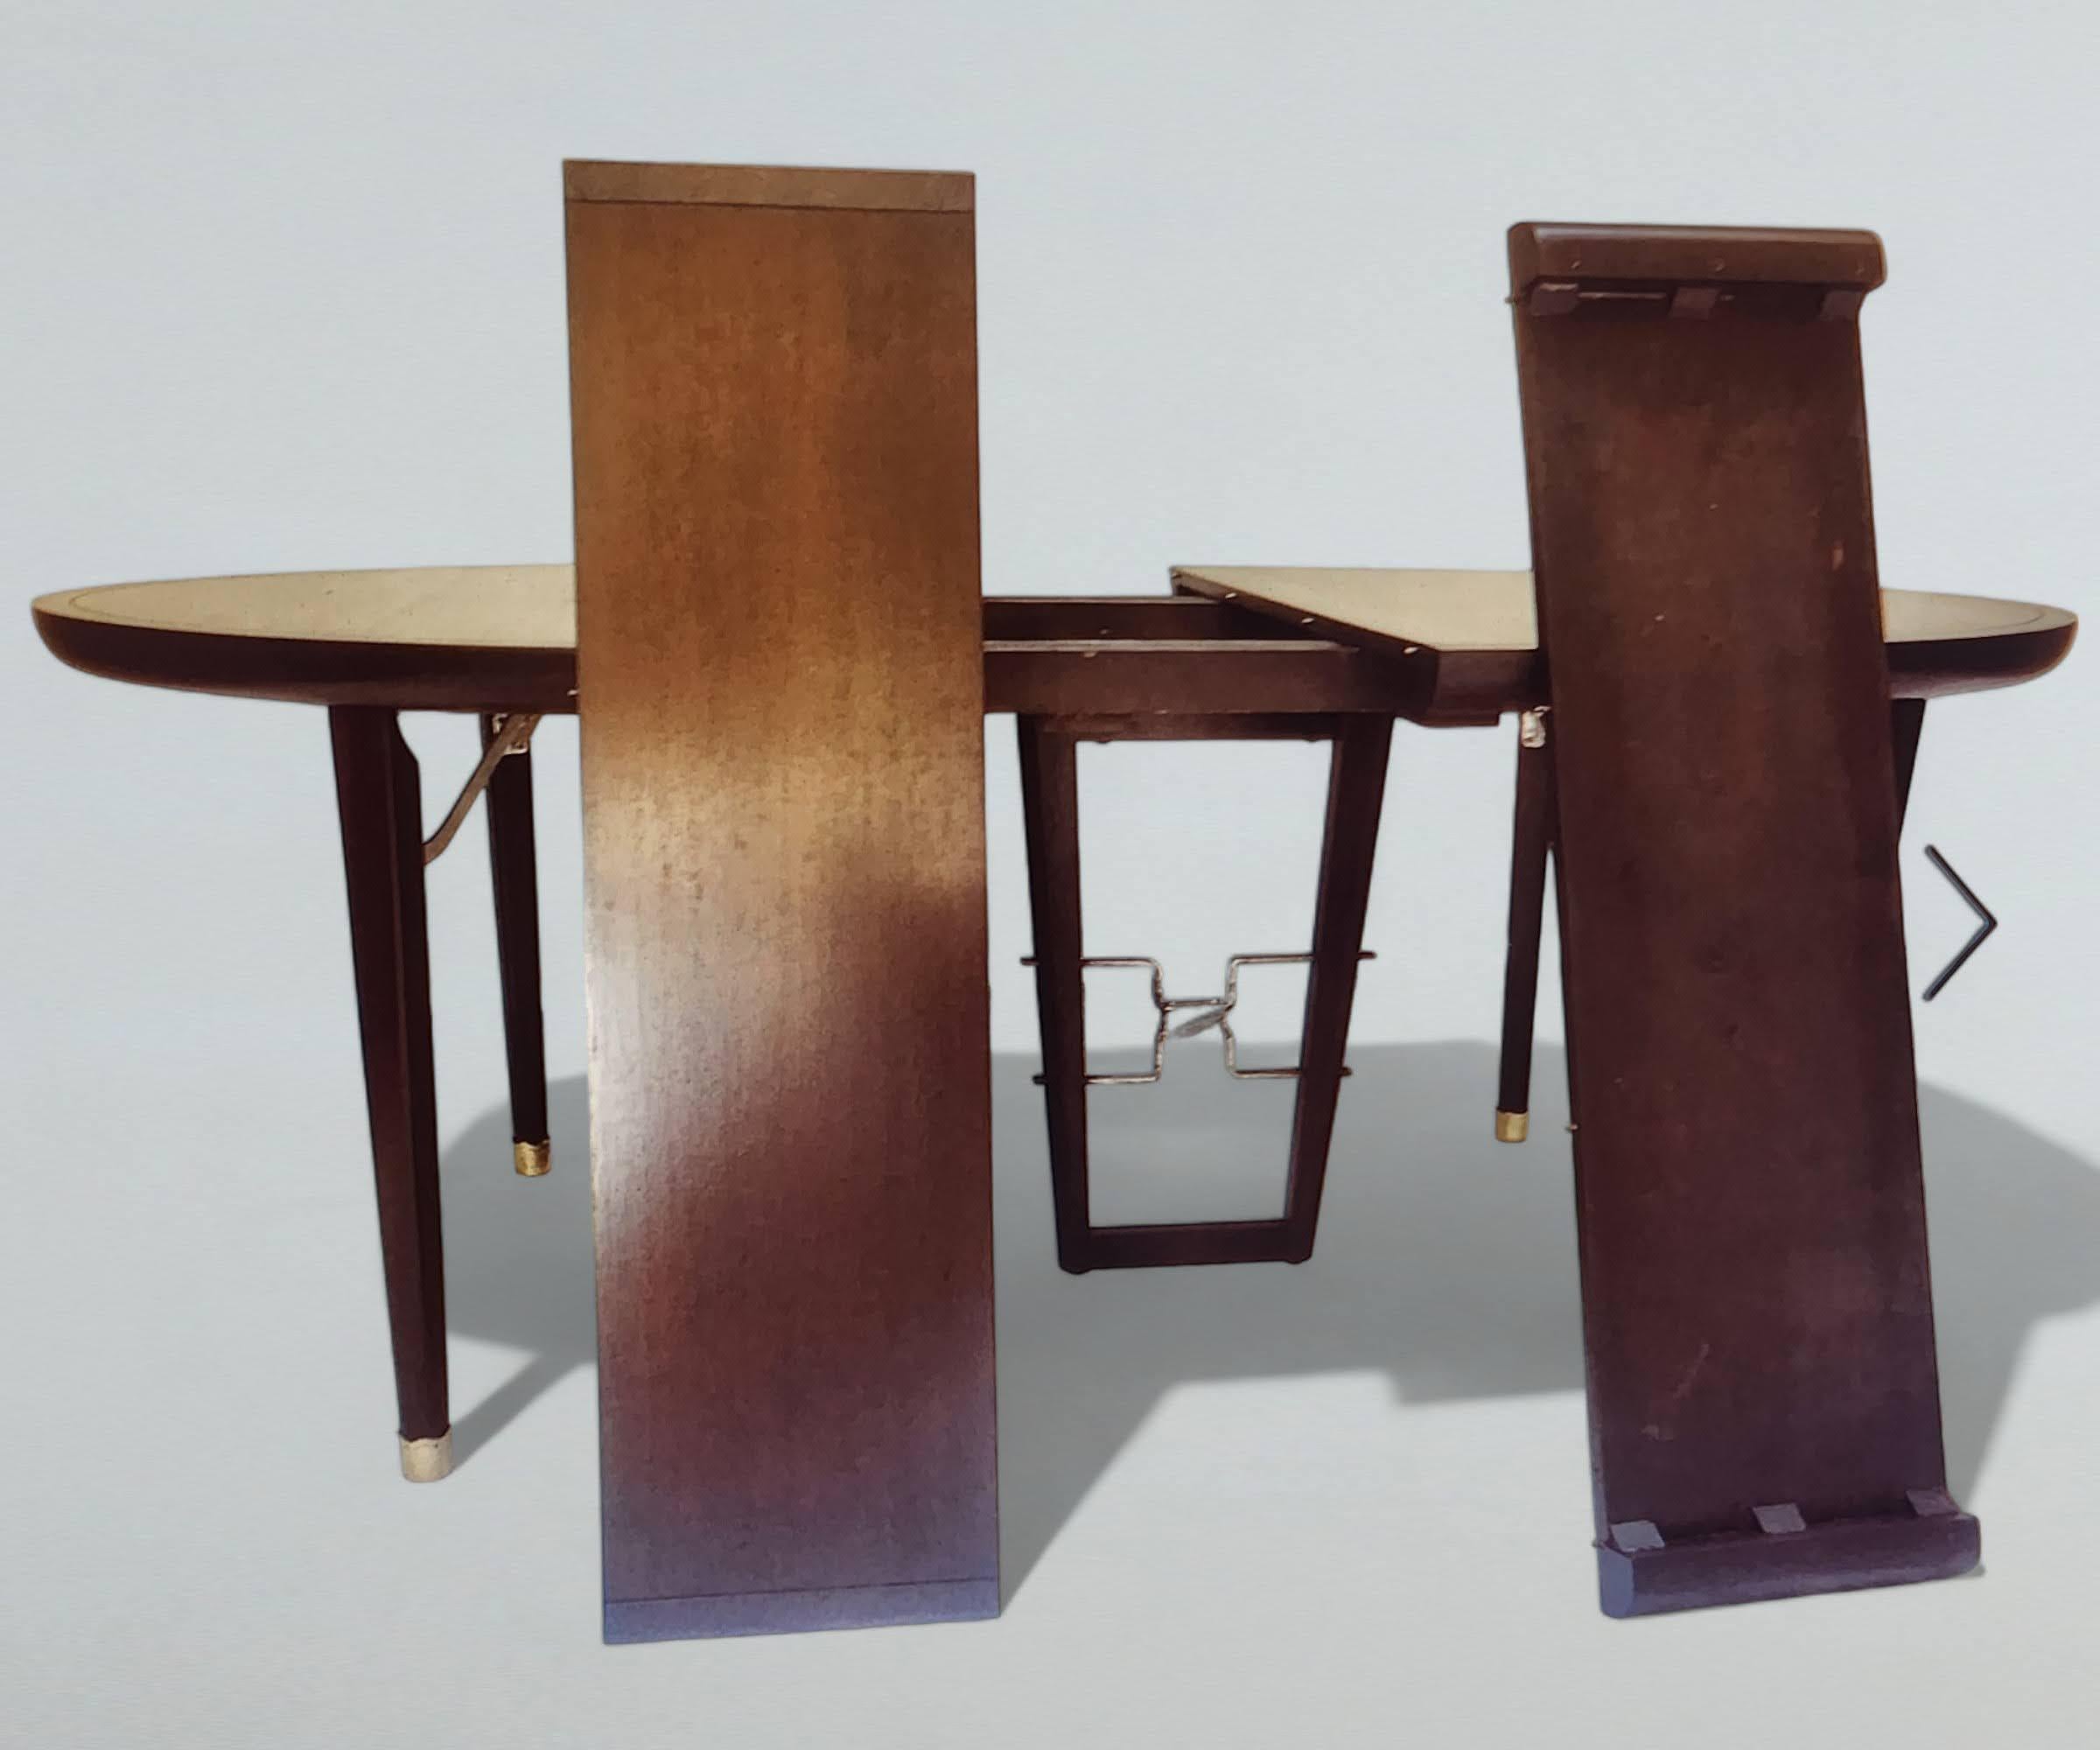 Edmond Spence Six Piece Mahogany Dinning Set for Industria Mueblera, S.A. 1950s  For Sale 3